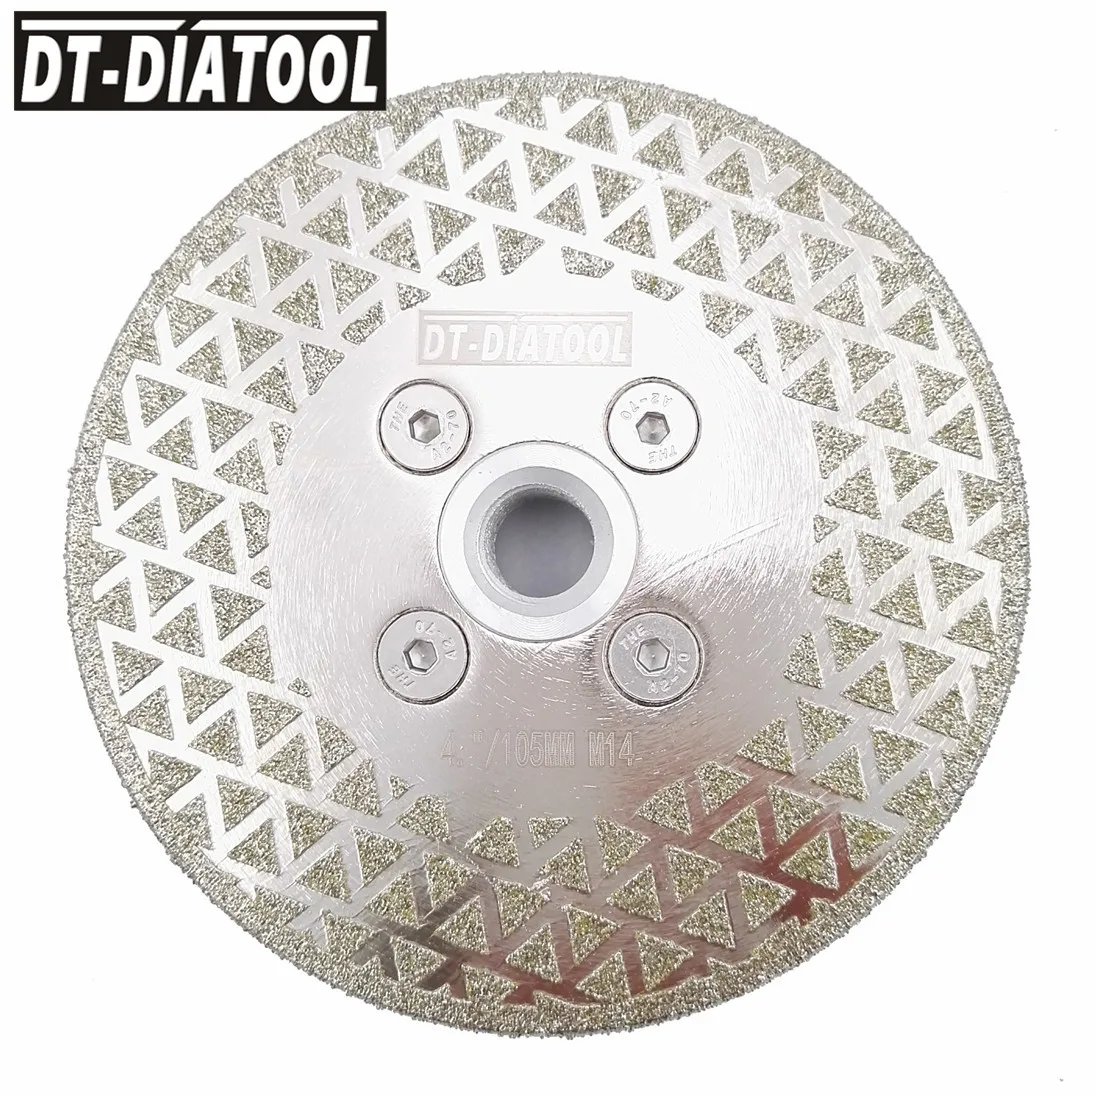 

DT-DIATOOL 1pc Electroplated Diamond Cutting & Grinding Blade M14 flange for tile Marble Single Side Coated Diamond Saw Blade